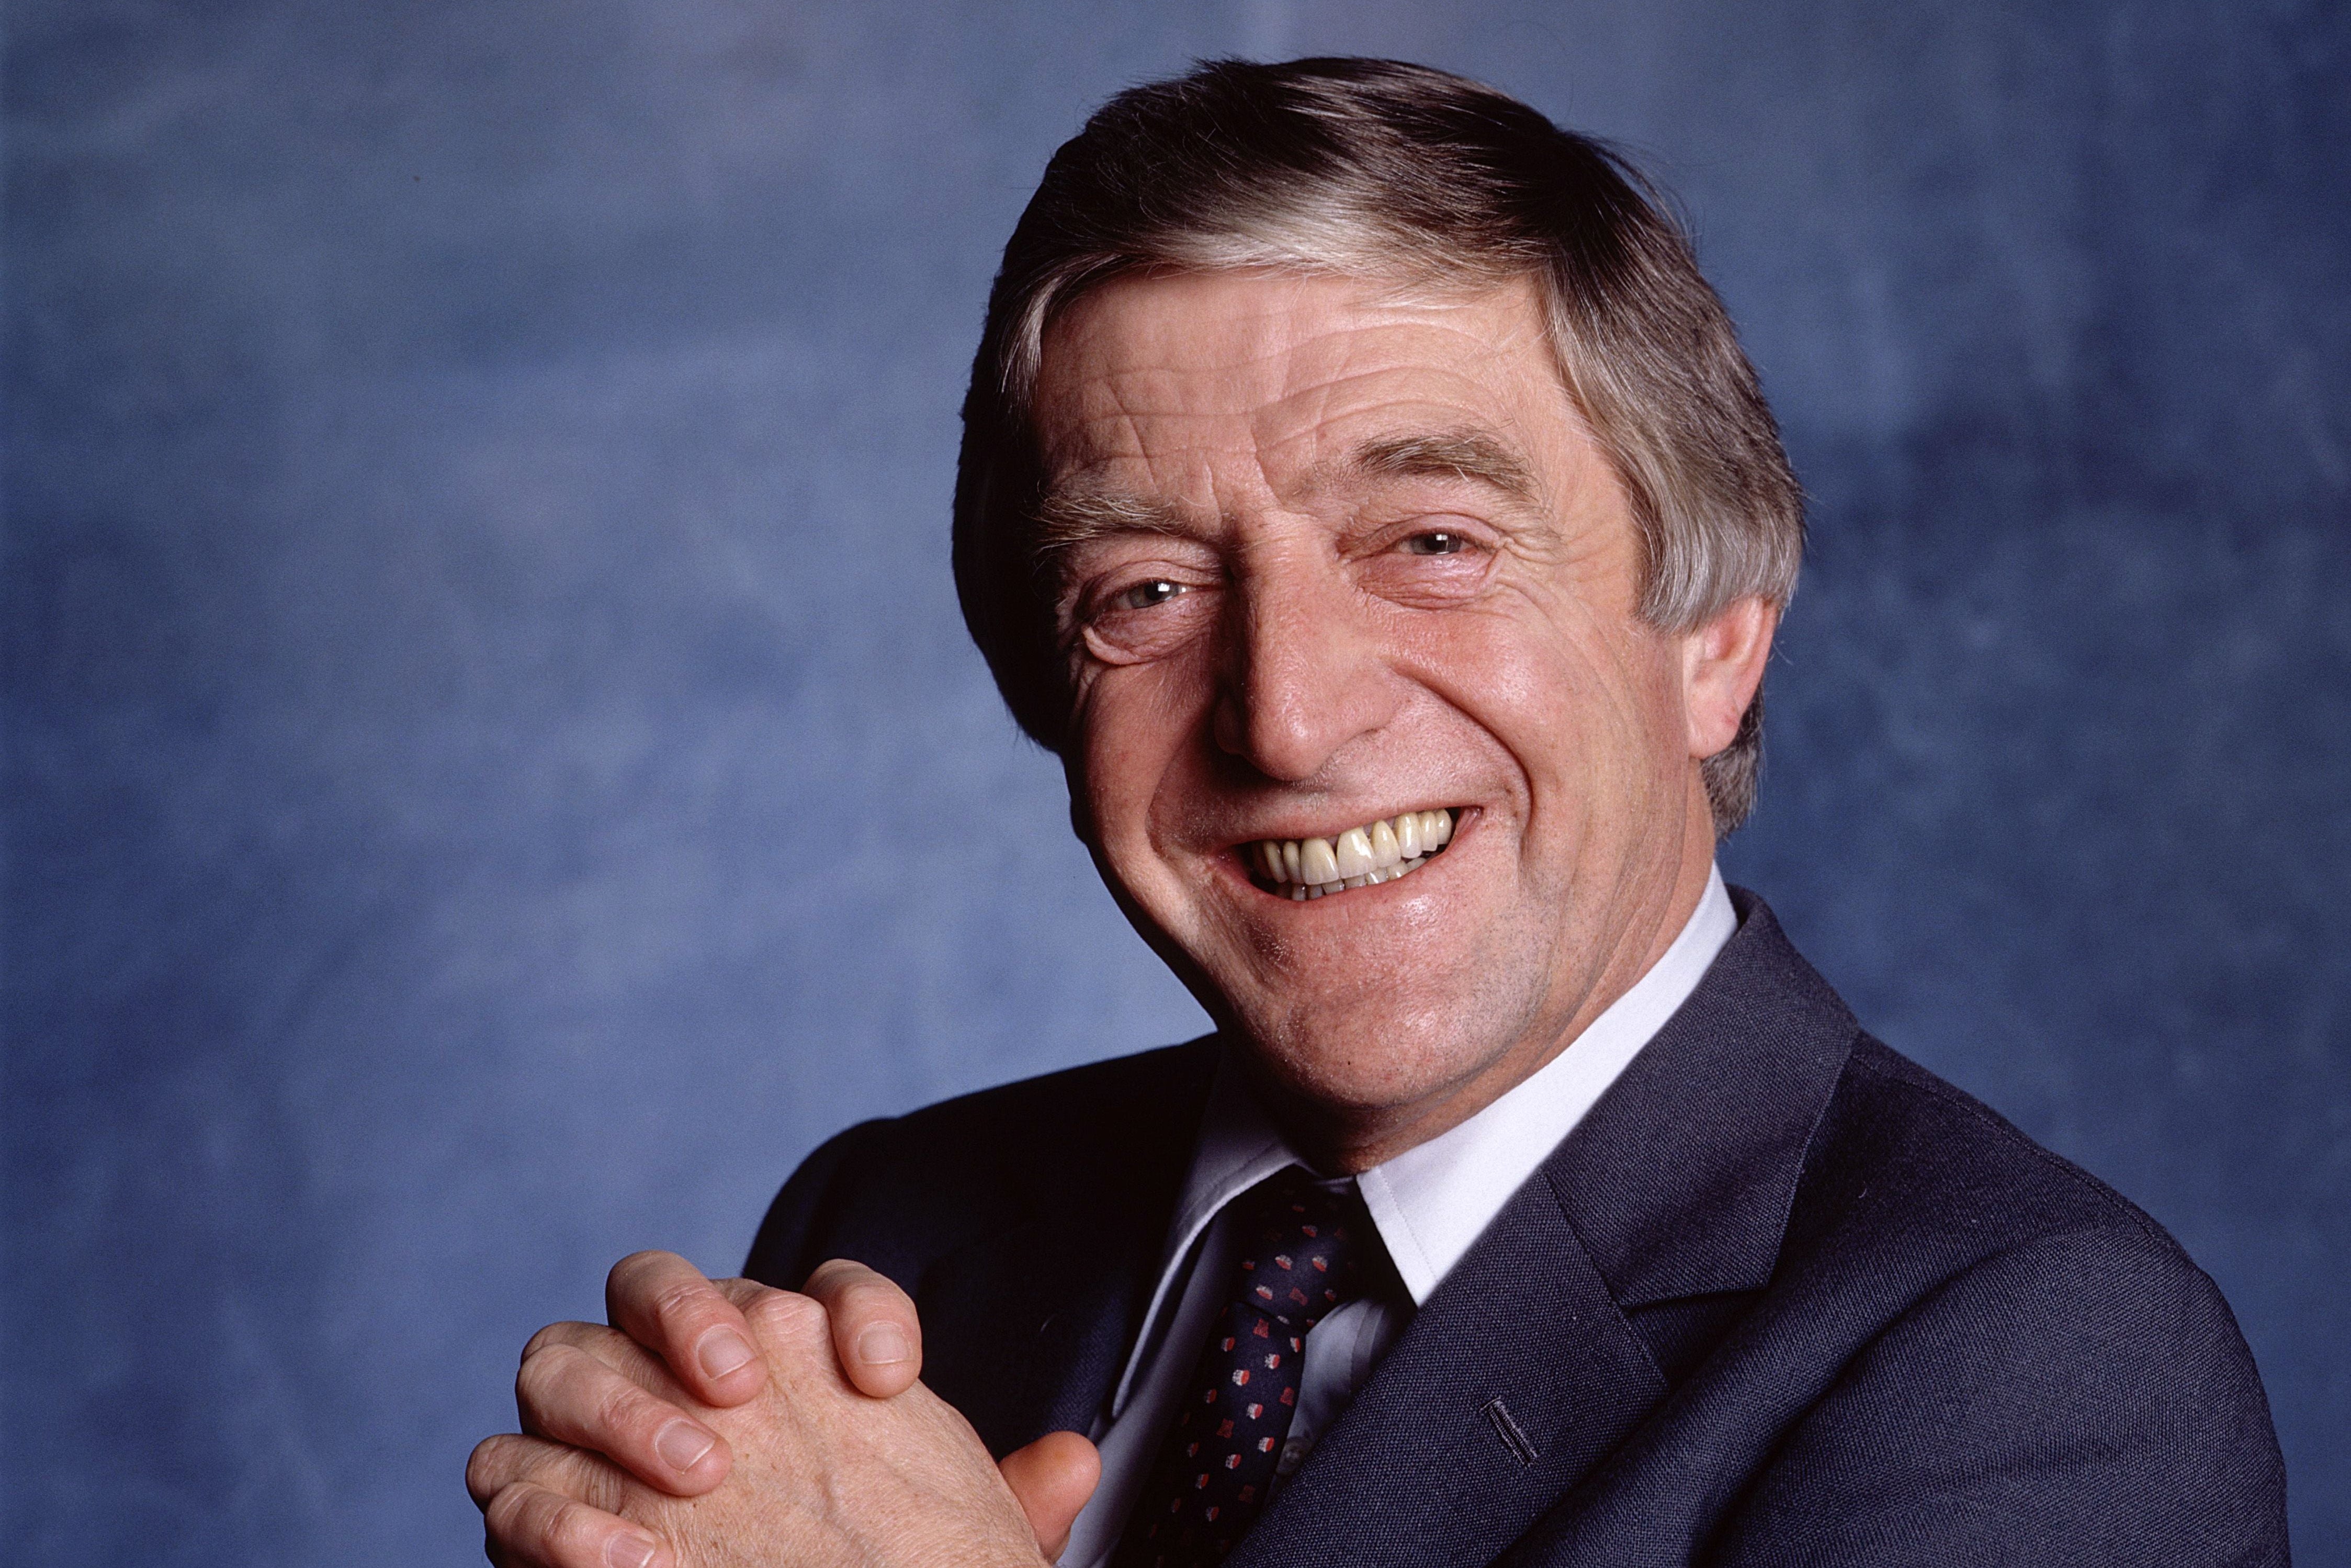 The British chat show legend Michael Parkinson, who has died at the age of 88